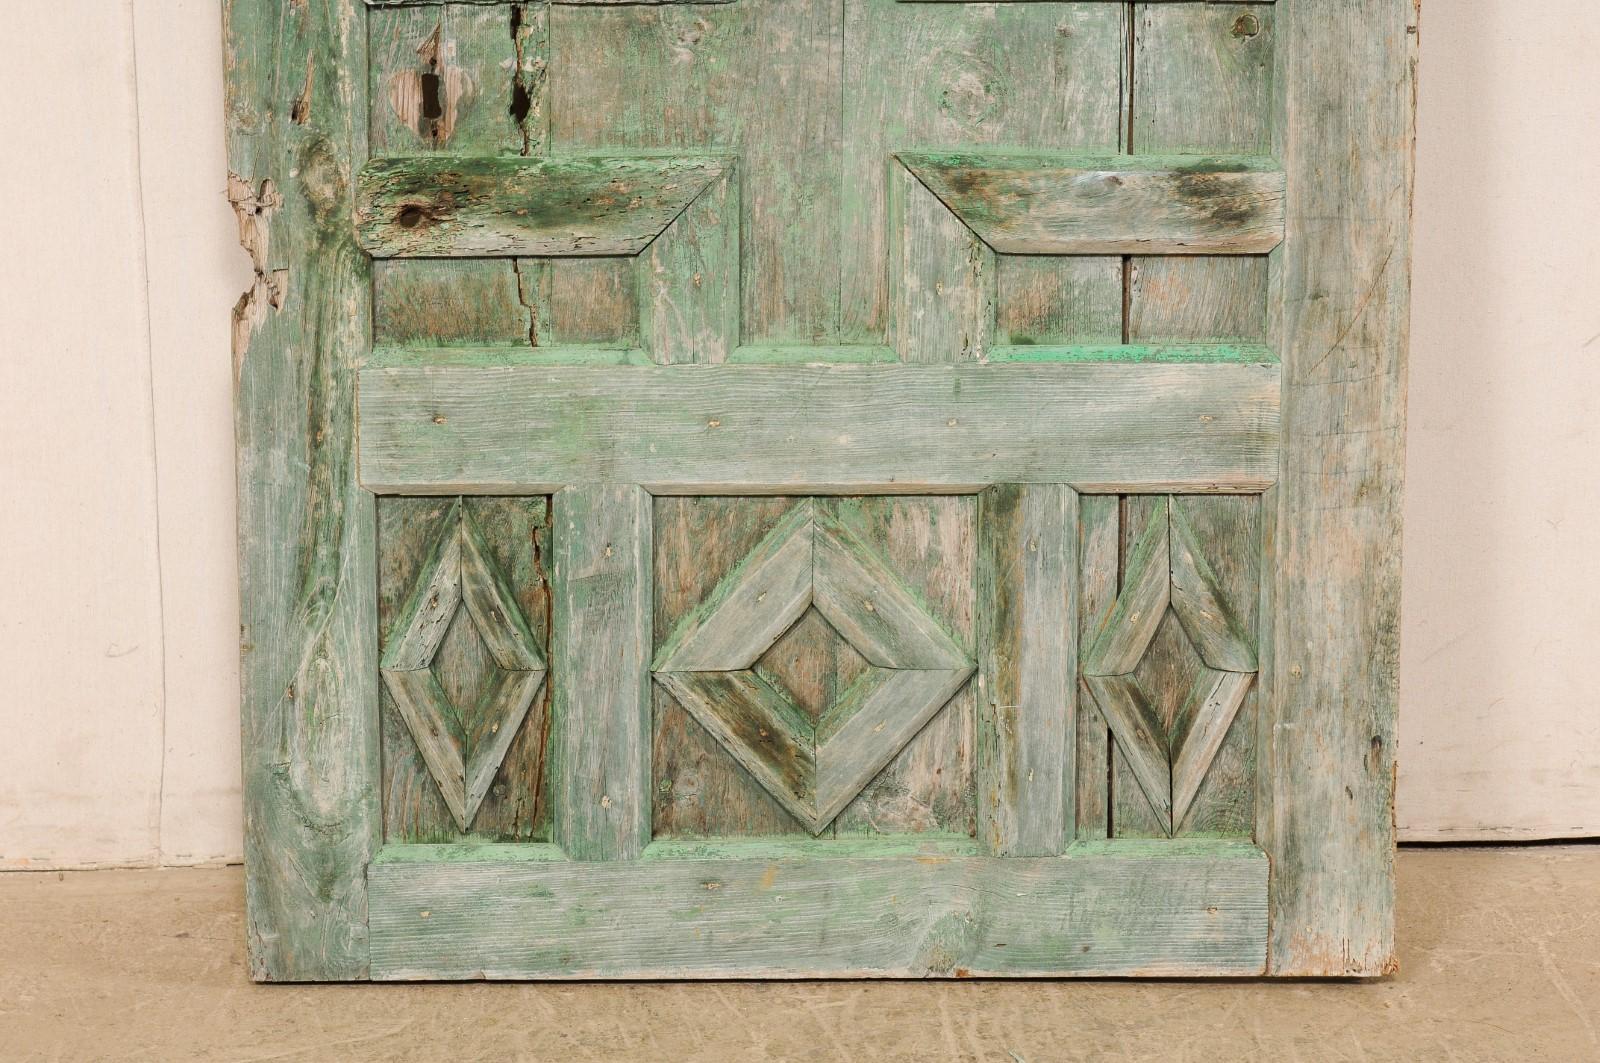 Spanish 19th Century Geometric Paneled Door with Its Original Green Paint For Sale 1